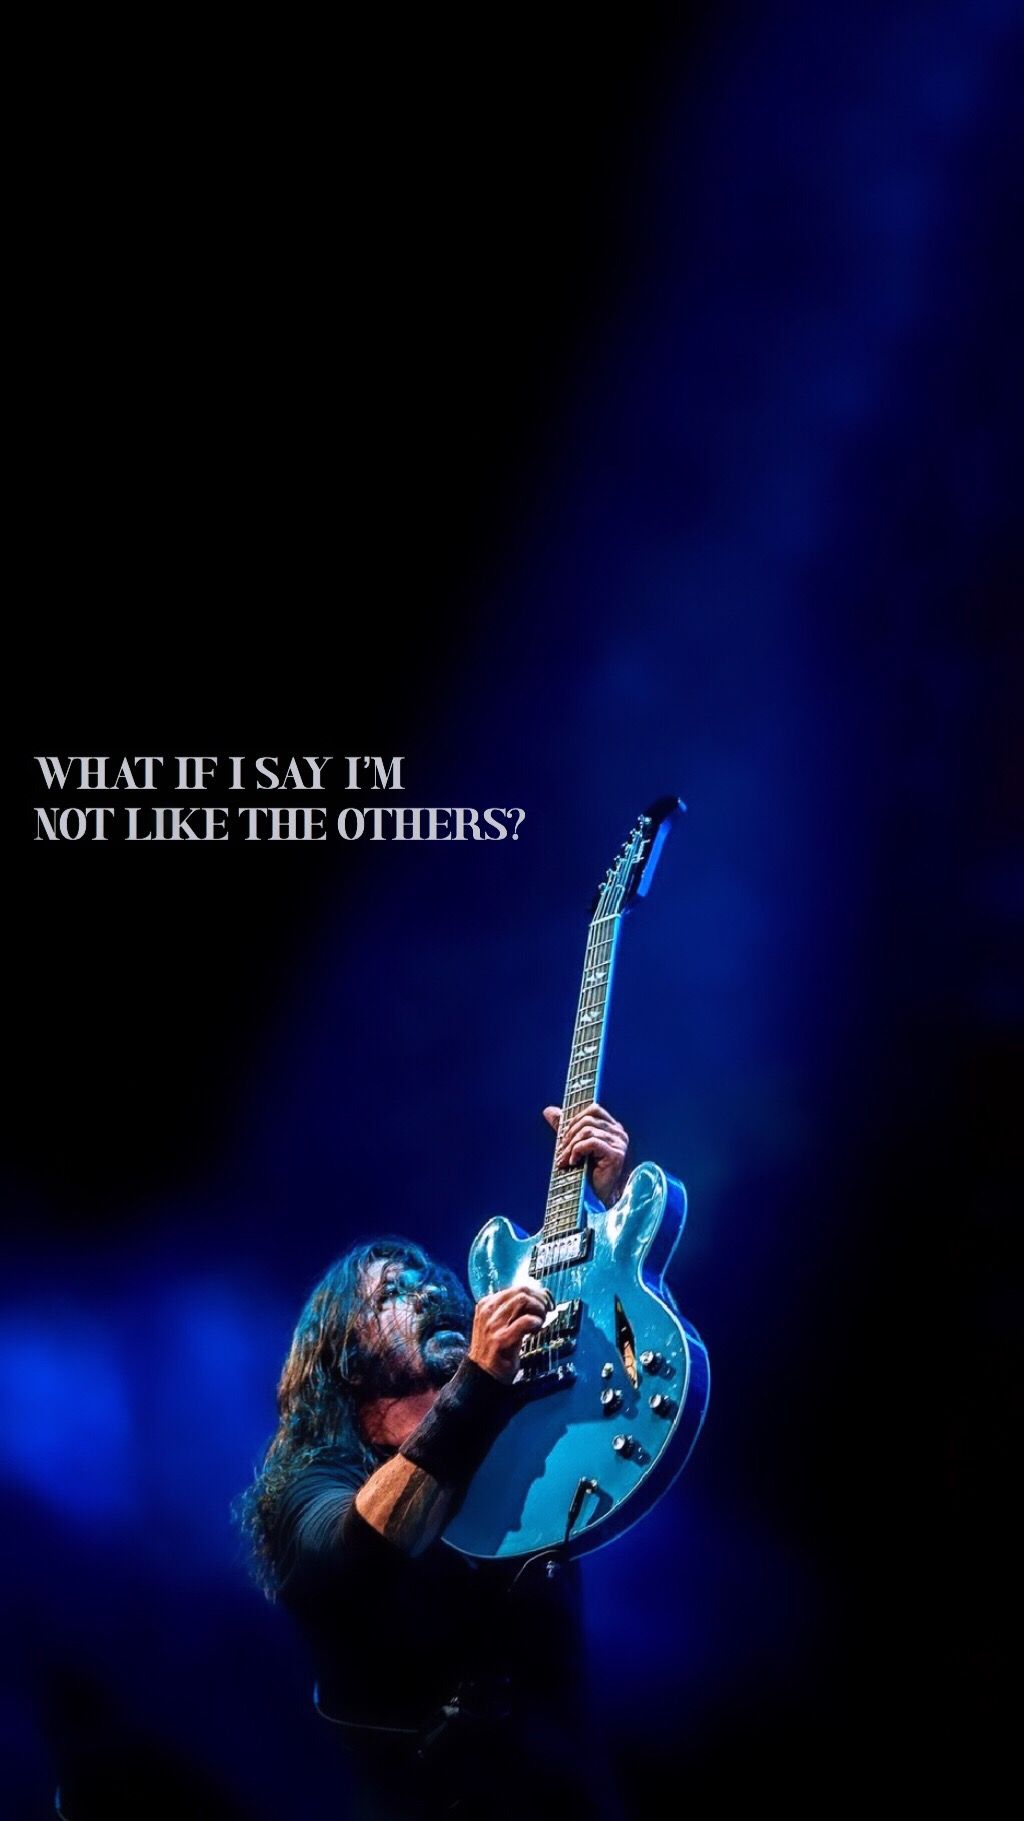 Dave Grohl Foo Fighters Wallpaper